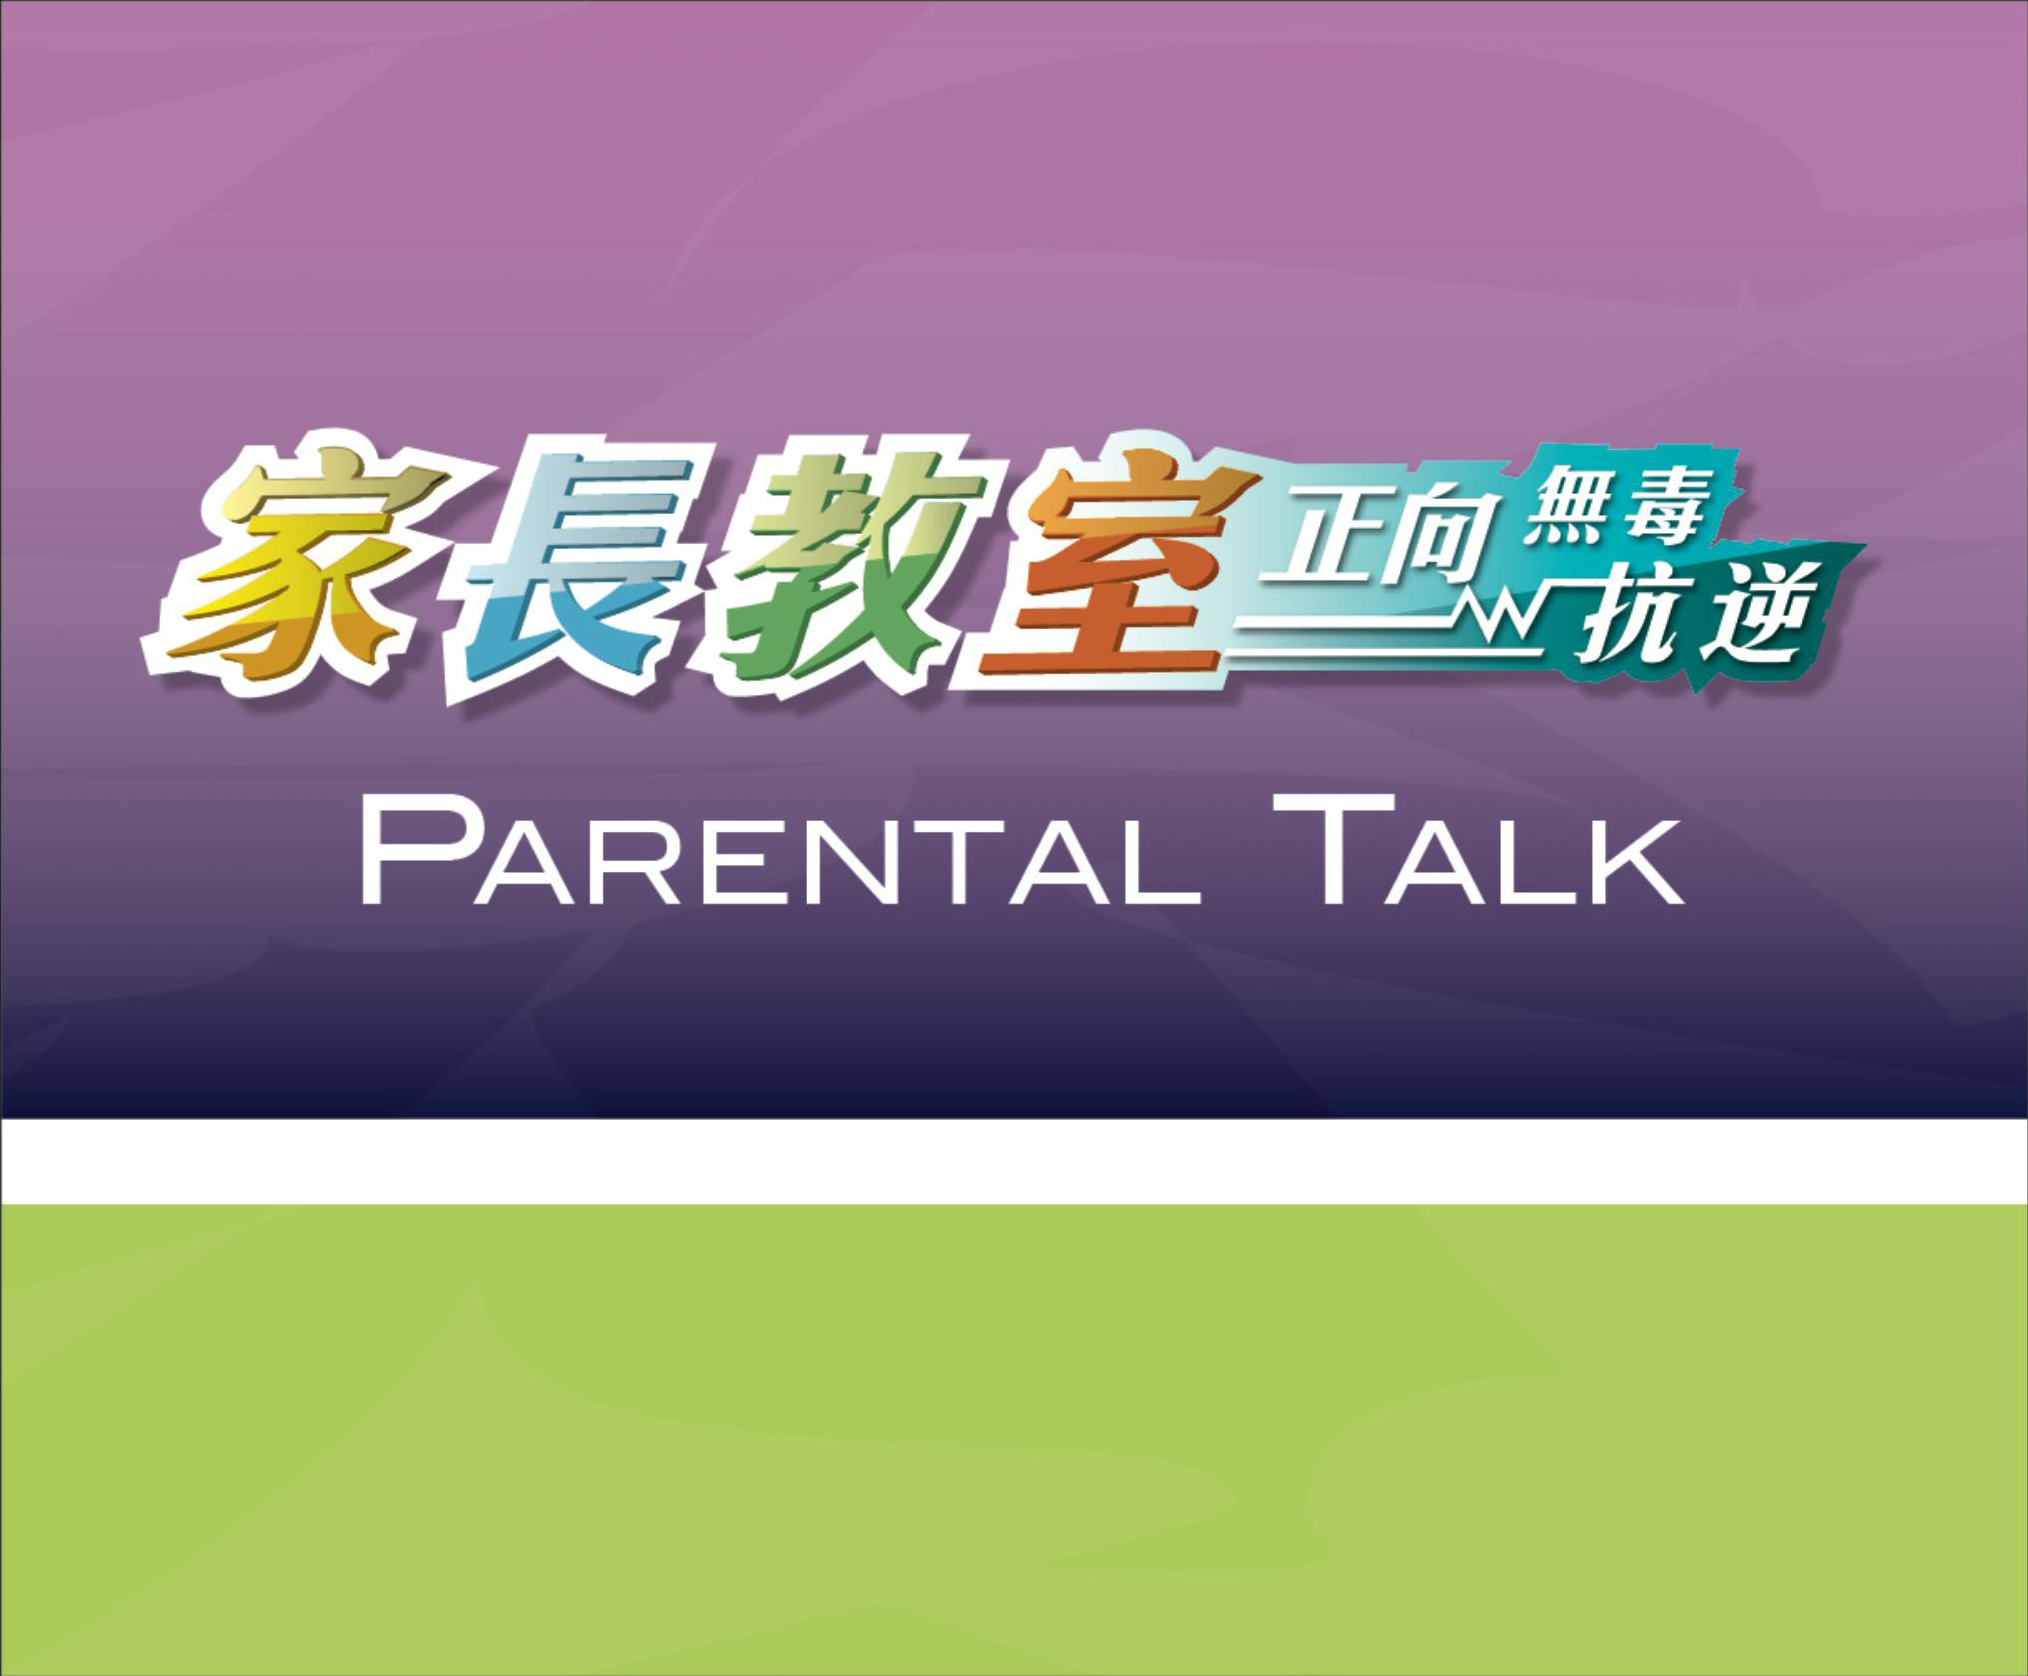 Parental Talk - Videos (Chinese only)